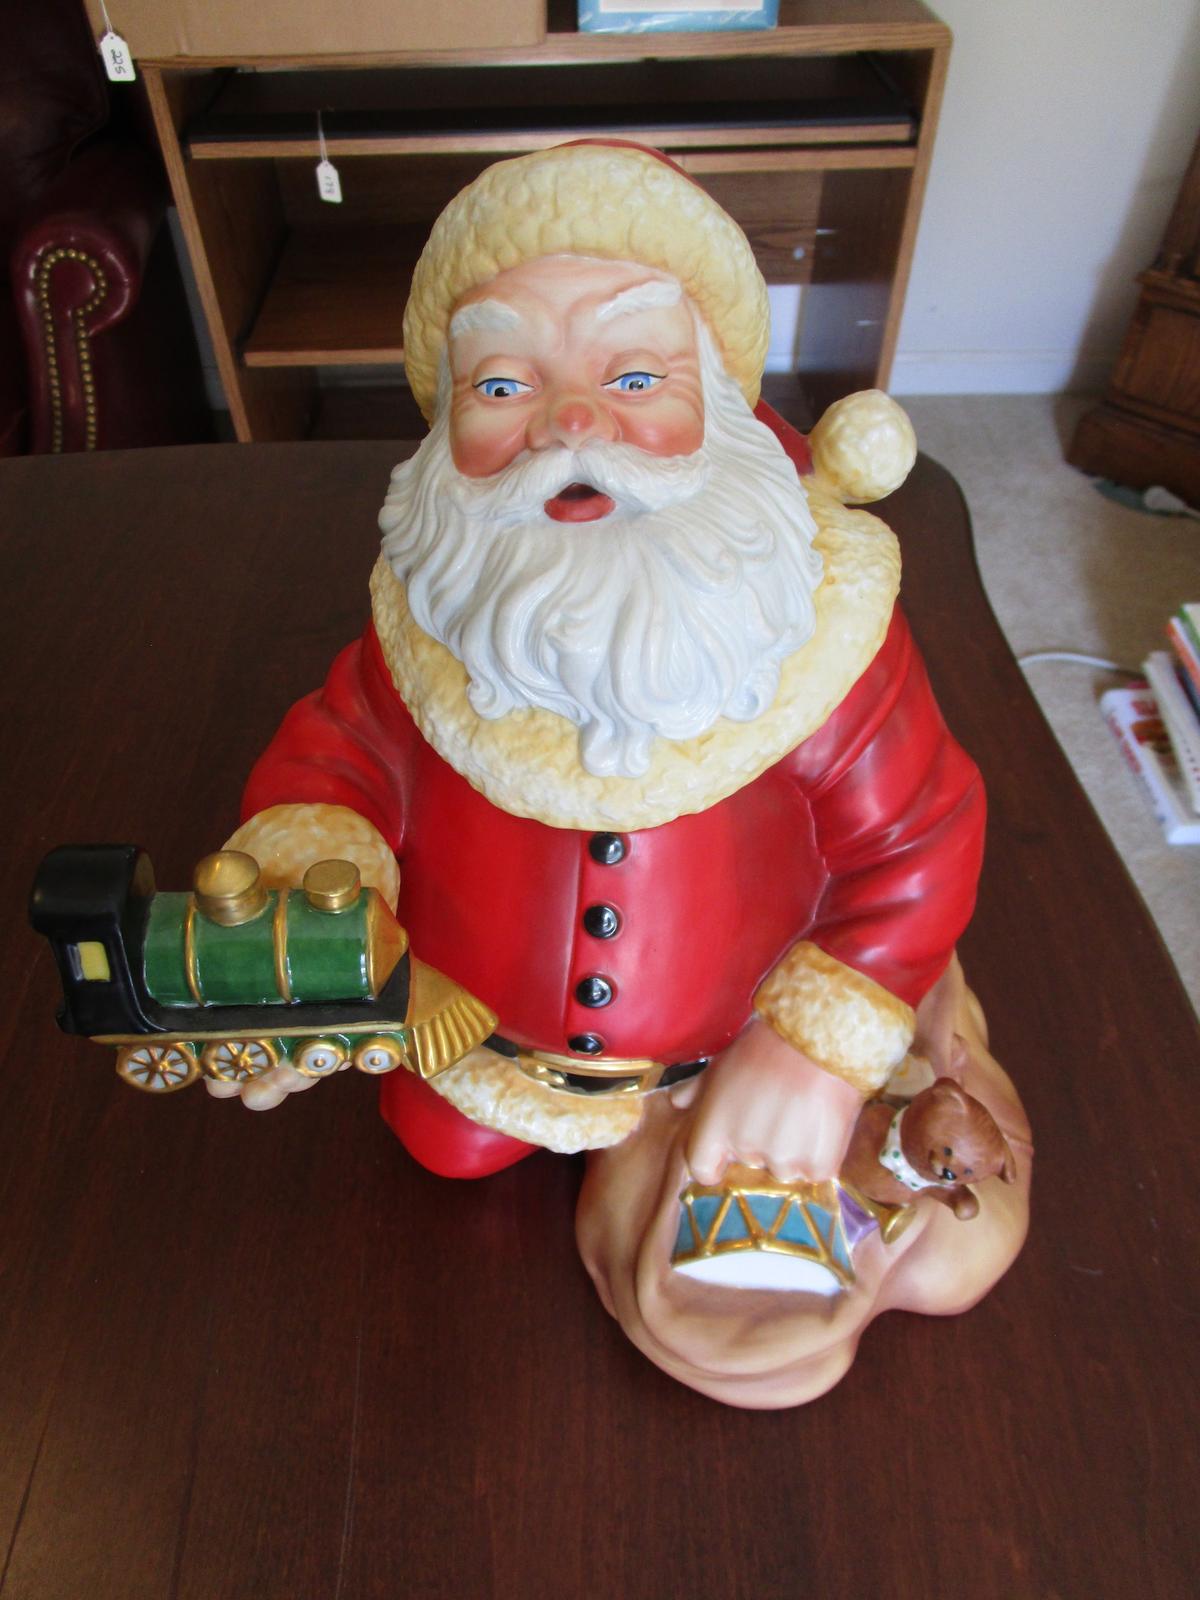 The Franklin Mint "The Night Before Christmas" Cookie Jar